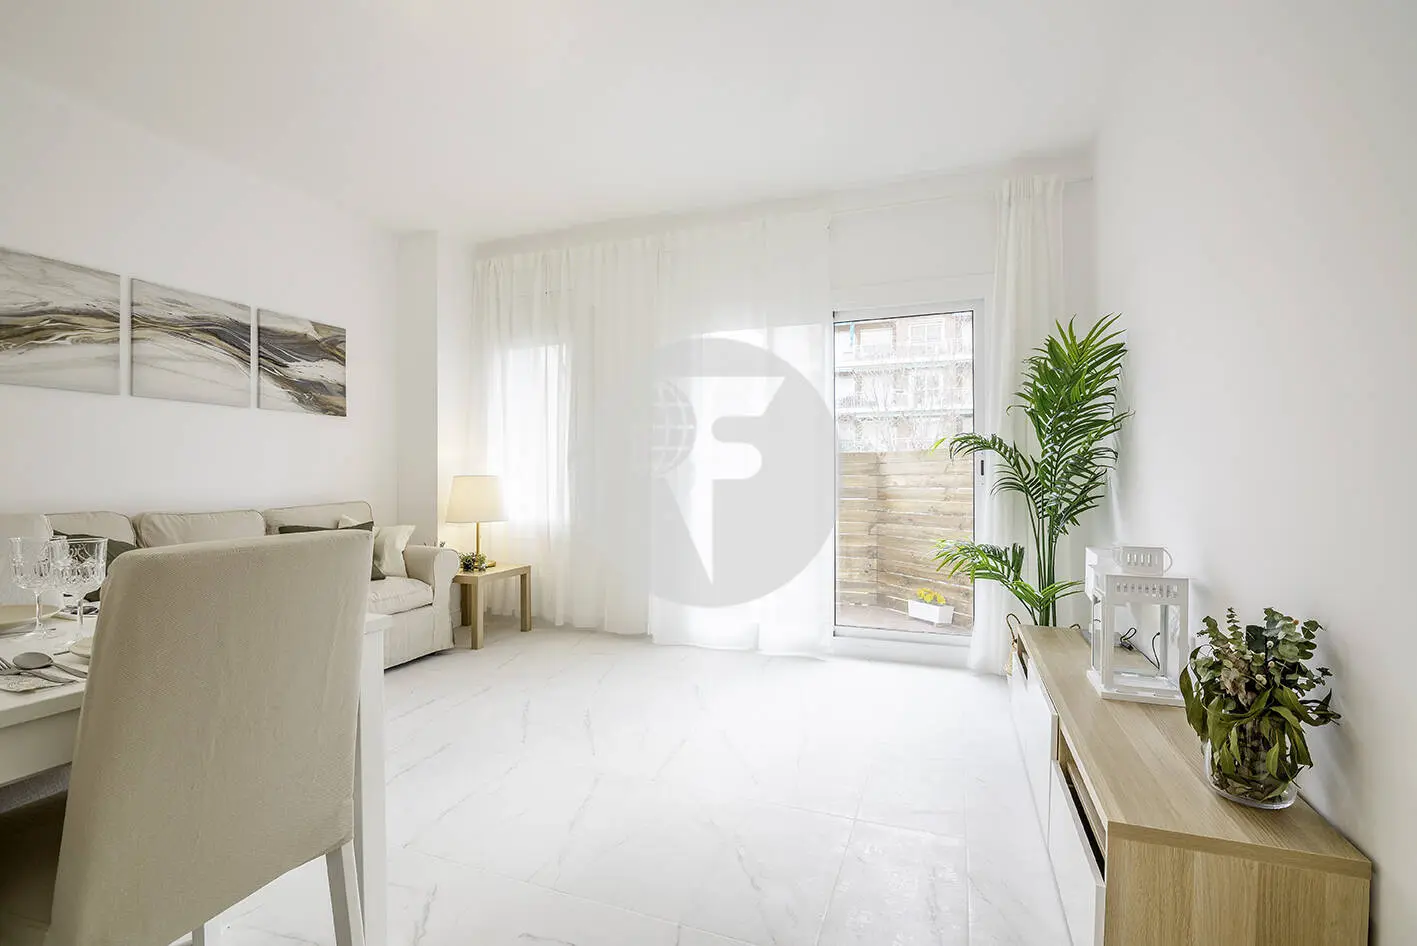 Brand new completely renovated apartment on Aragó street in the heart of El Clot in Barcelona. 2